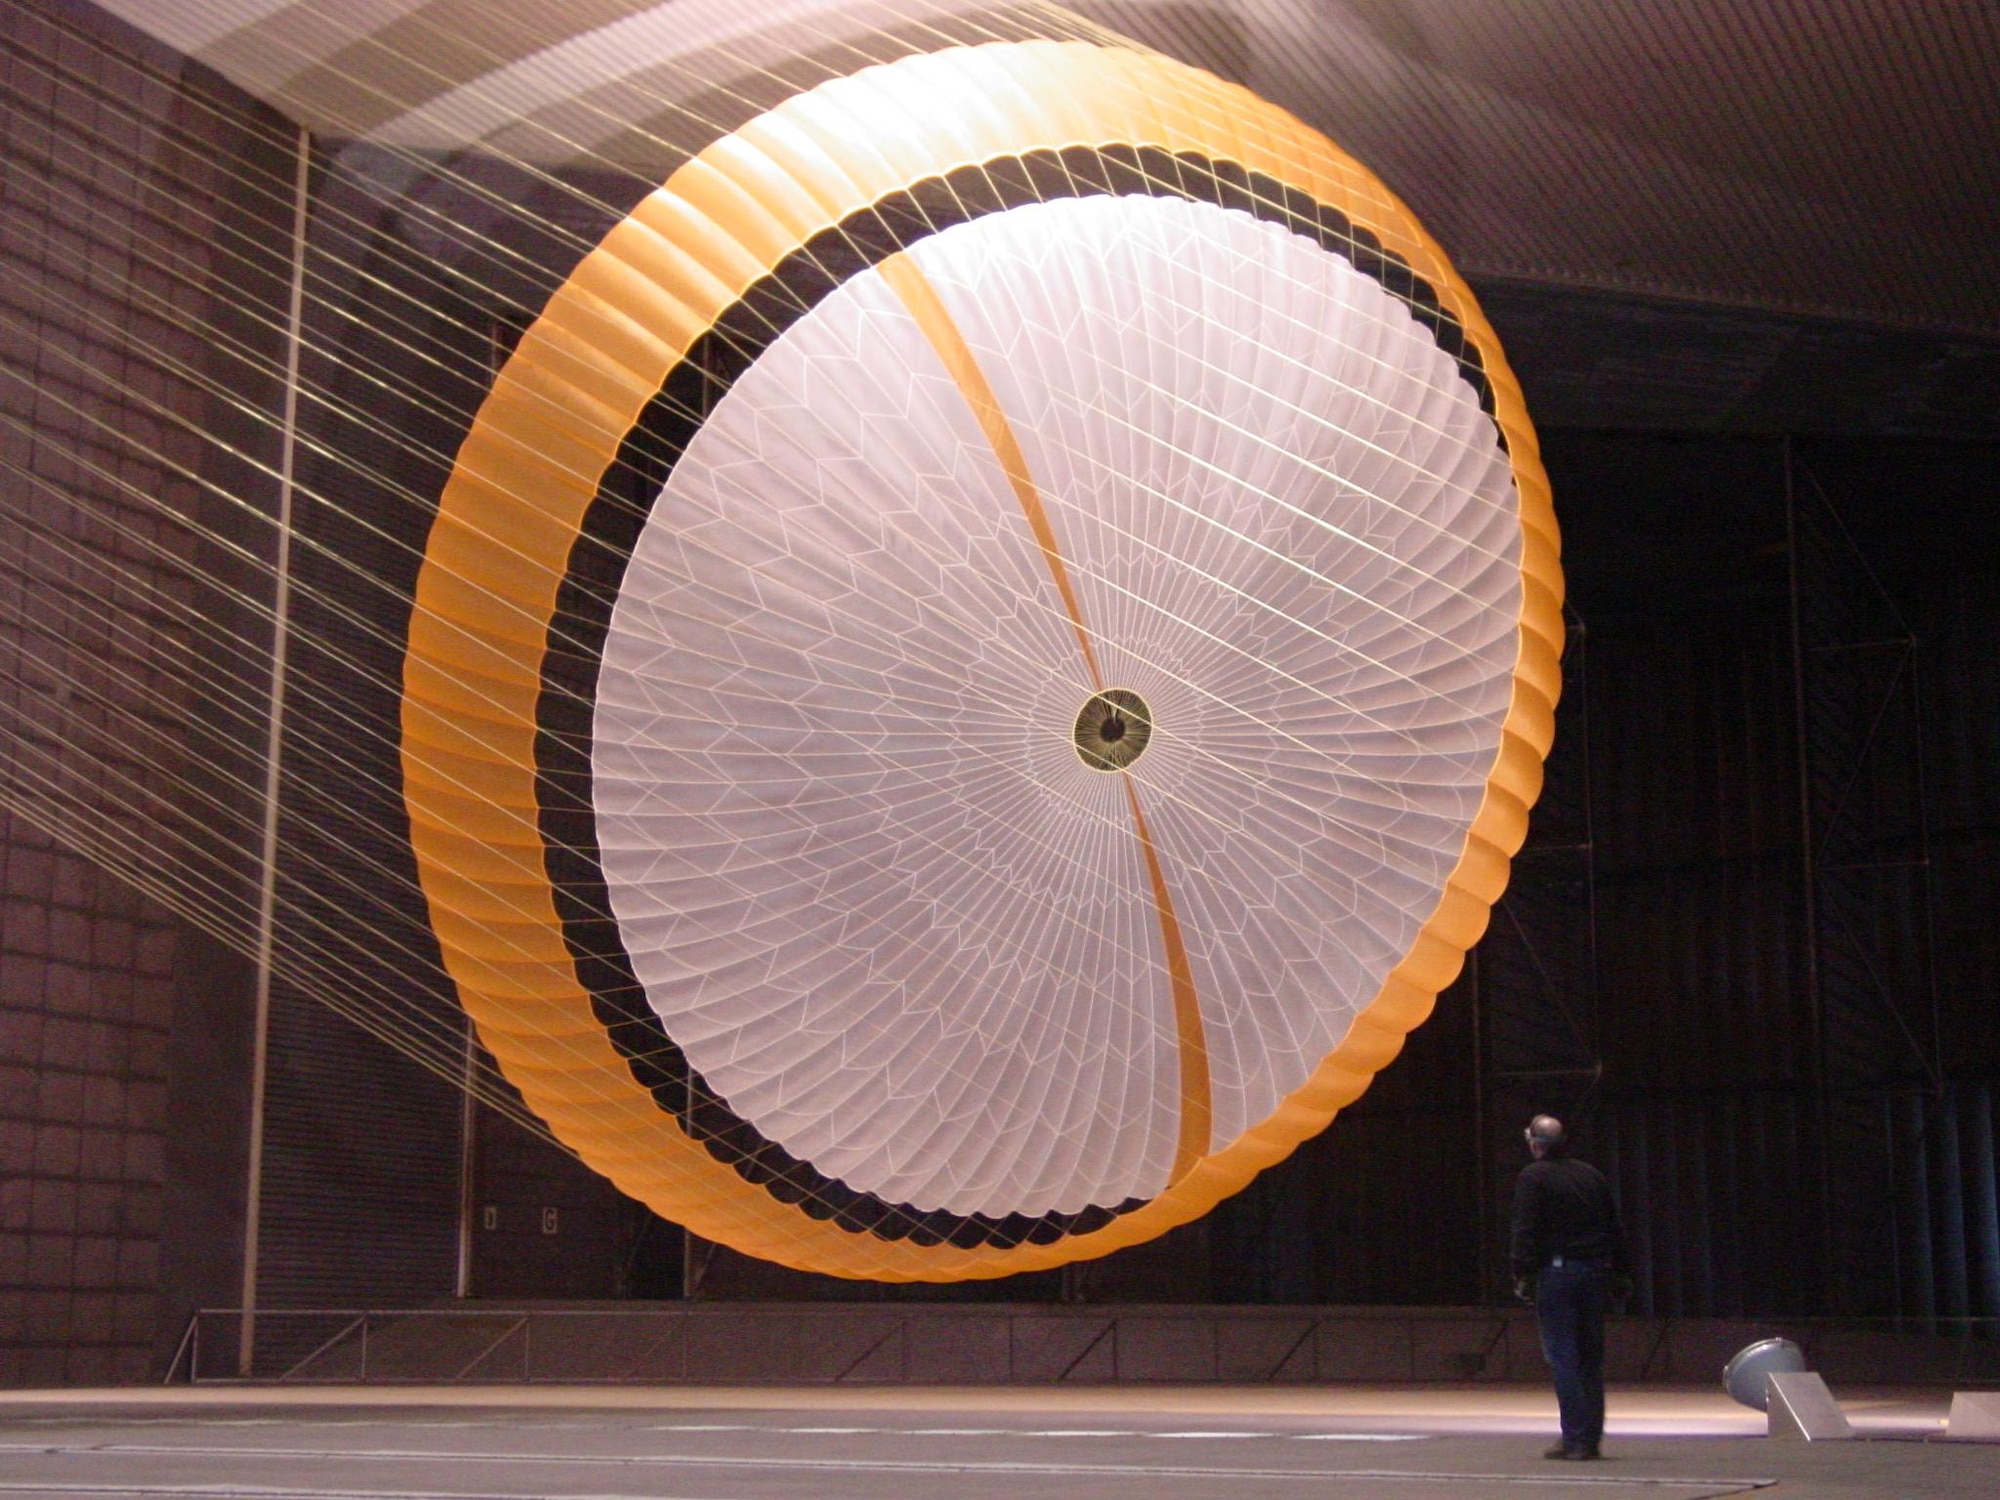 An engineer is dwarfed by a Mars Lander parachute tested at the National Full-Scale Aerodynamics Complex at Moffett Field, California, in 2007. The parachute, measuring more than 65 feet in length, opening to a diameter of nearly 55 feet and designed to survive loads in excess of 80,000 pounds, was the largest disk-gap-band parachute ever built. This image was featured on the frontpage of the Jan. 11, 2008, issue of High Mach. (Photo courtesy of NASA/JPL and Pioneer Aerospace Corp.)